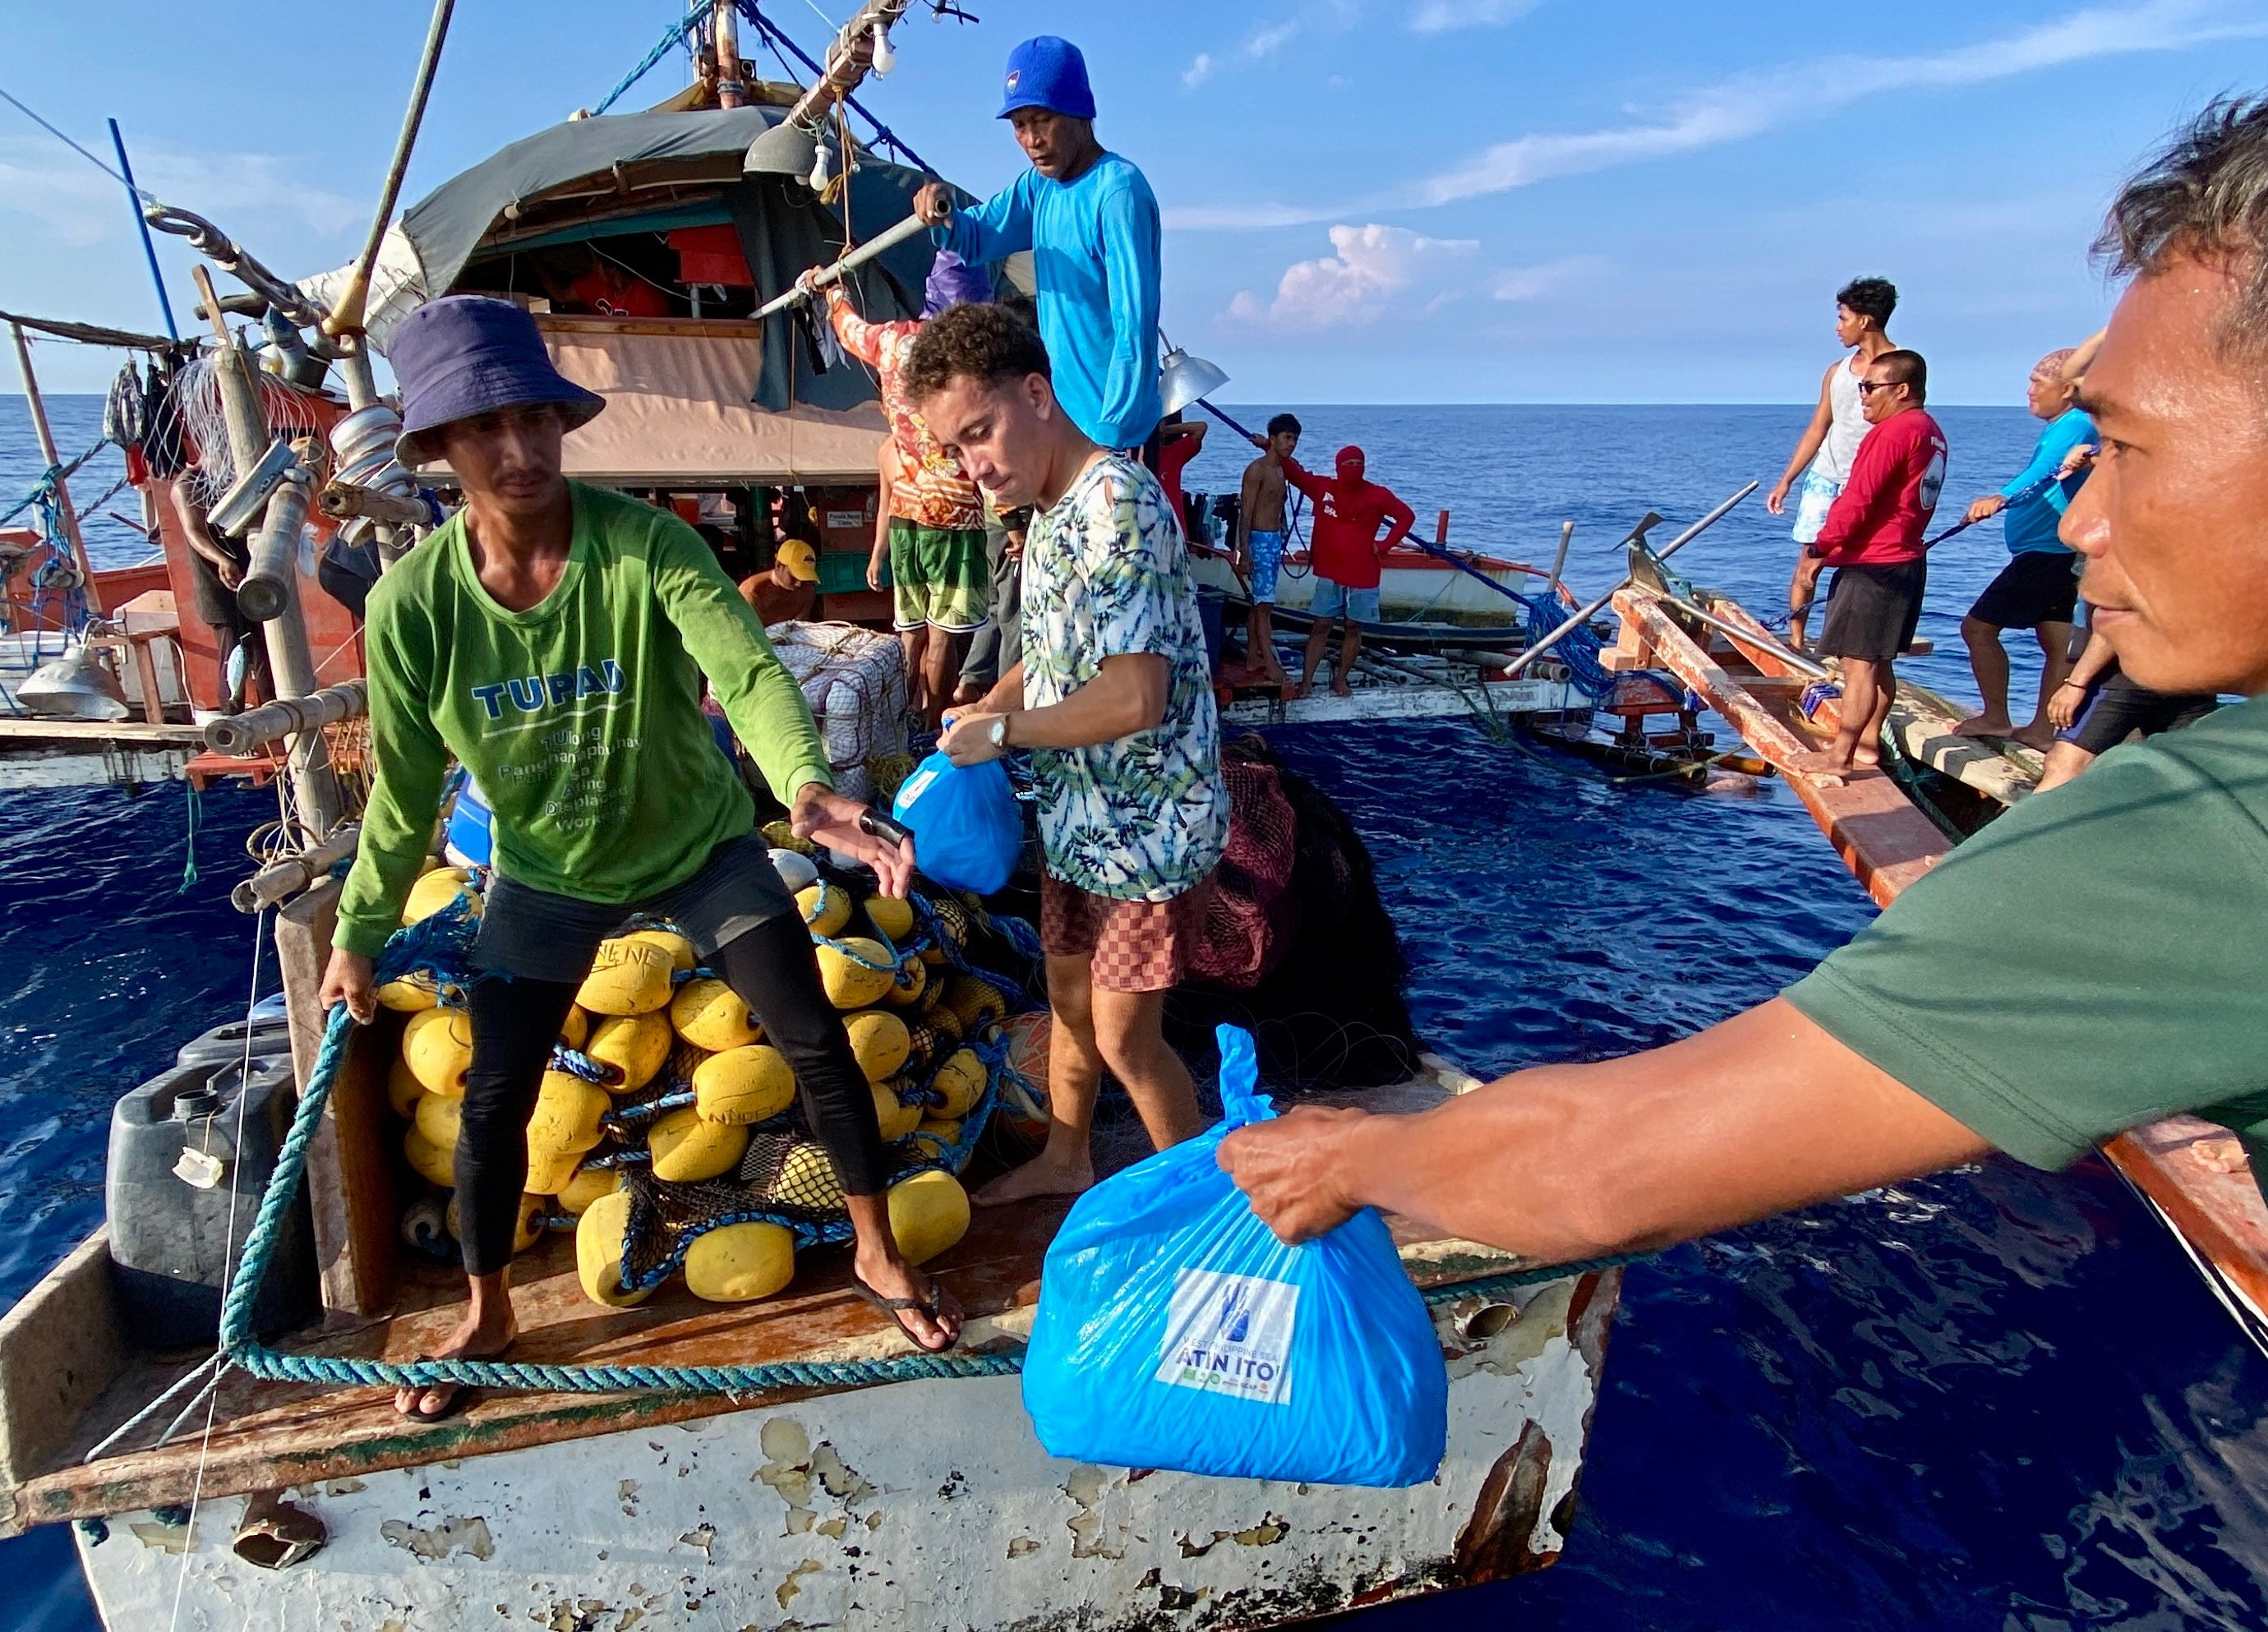 Filipino volunteers from the civilian-led relief mission Atin Ito (It’s Ours!) group distribute relief goods to fishermen aboard a motorised wooden boat on the waters of the disputed South China Sea, on May 16. Photo: EPA-EFE